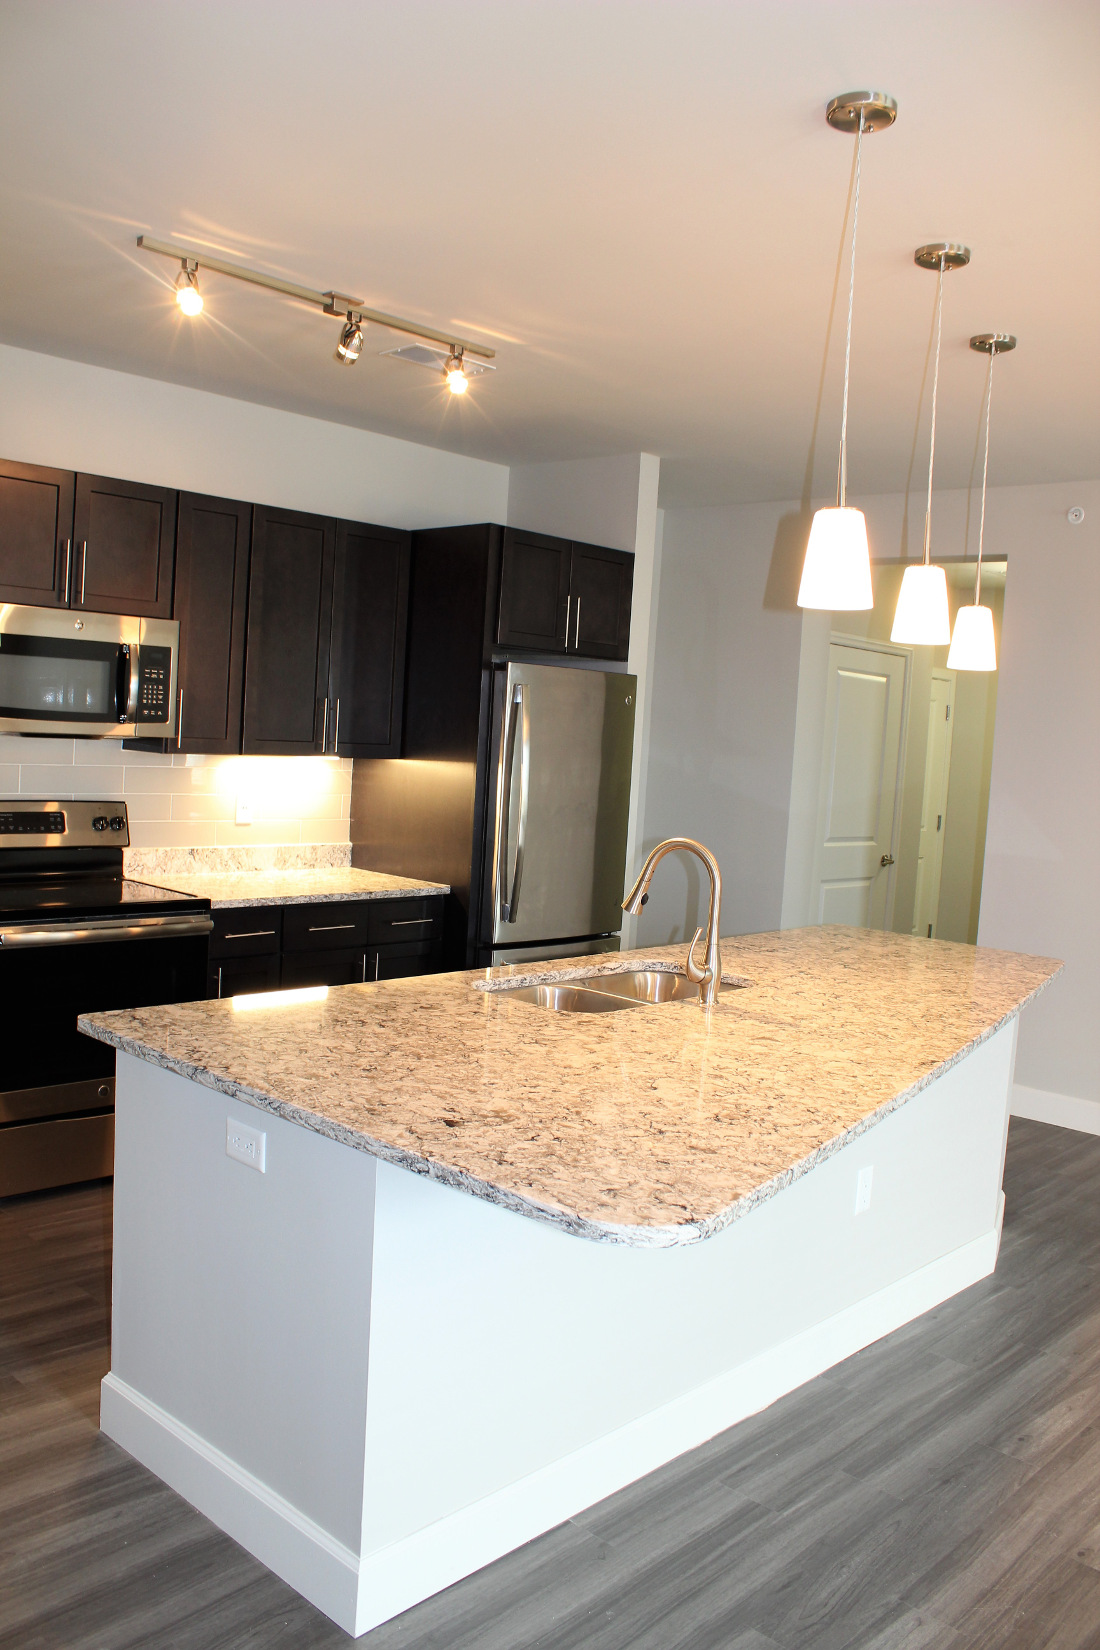 B3 Kitchen at the Vue at Creve Coeur Apartments in Creve Coeur, MO